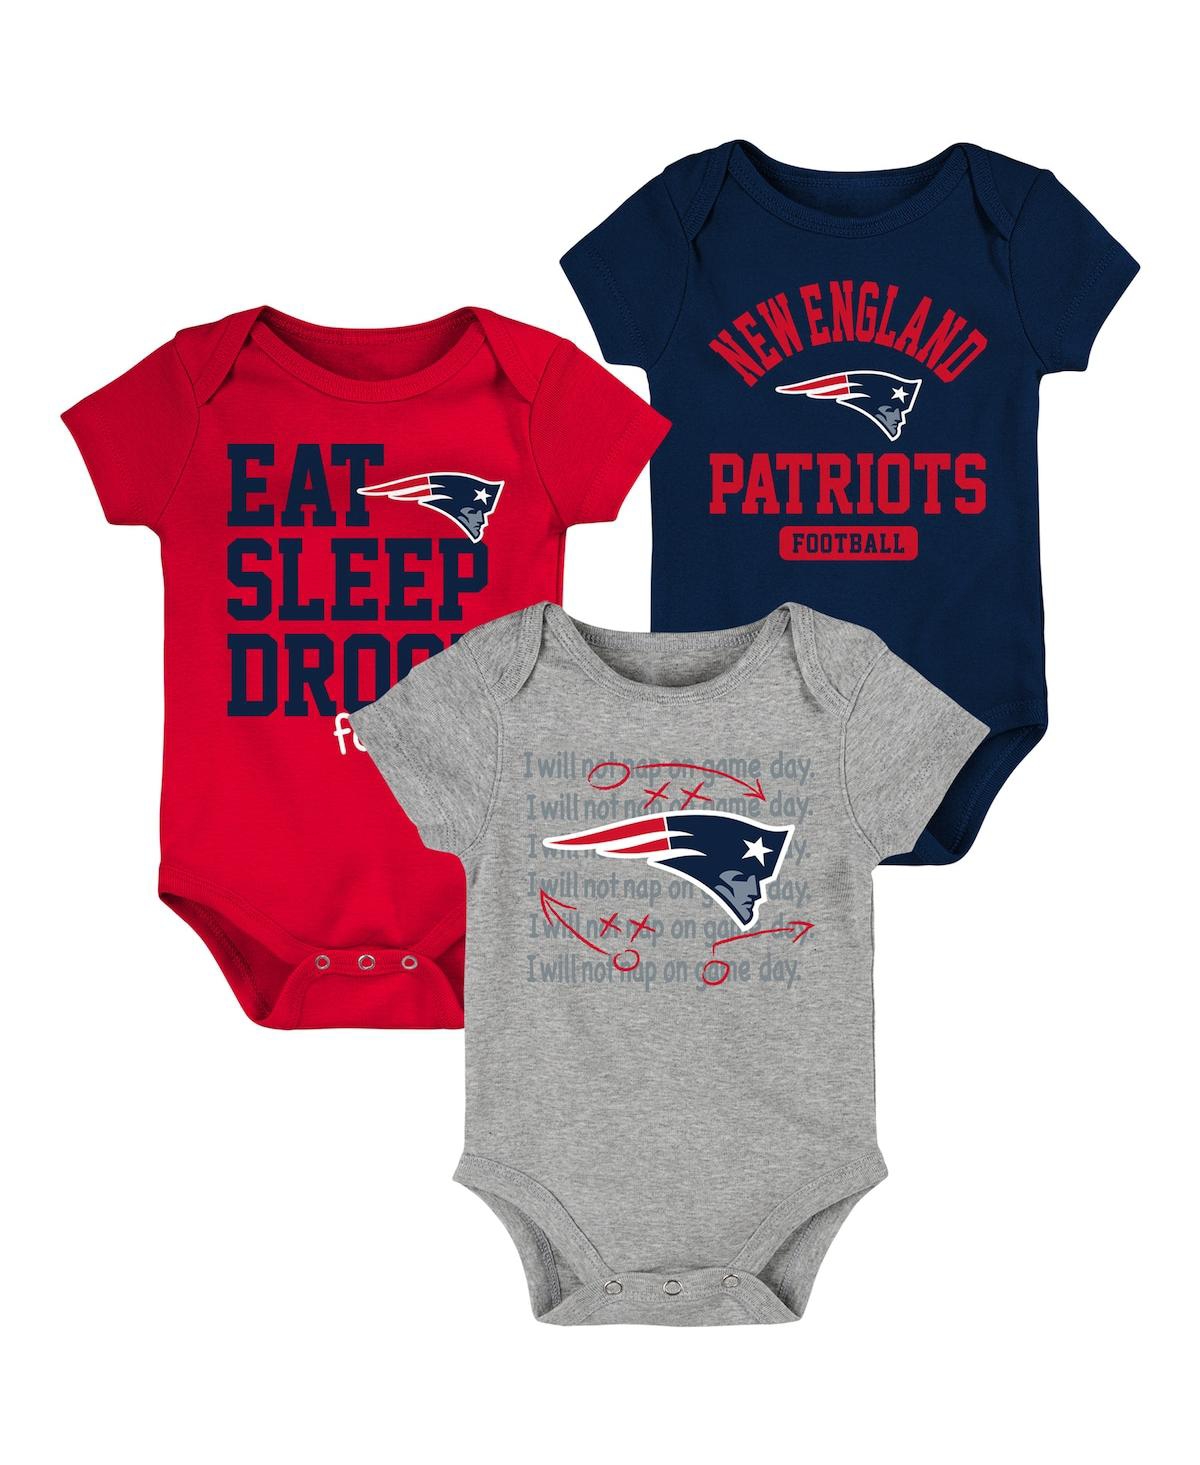 Outerstuff Babies' Newborn And Infant Boys And Girls Royal, Red New York Giants Eat Sleep Drool Football Three-piece Bo In Navy,red